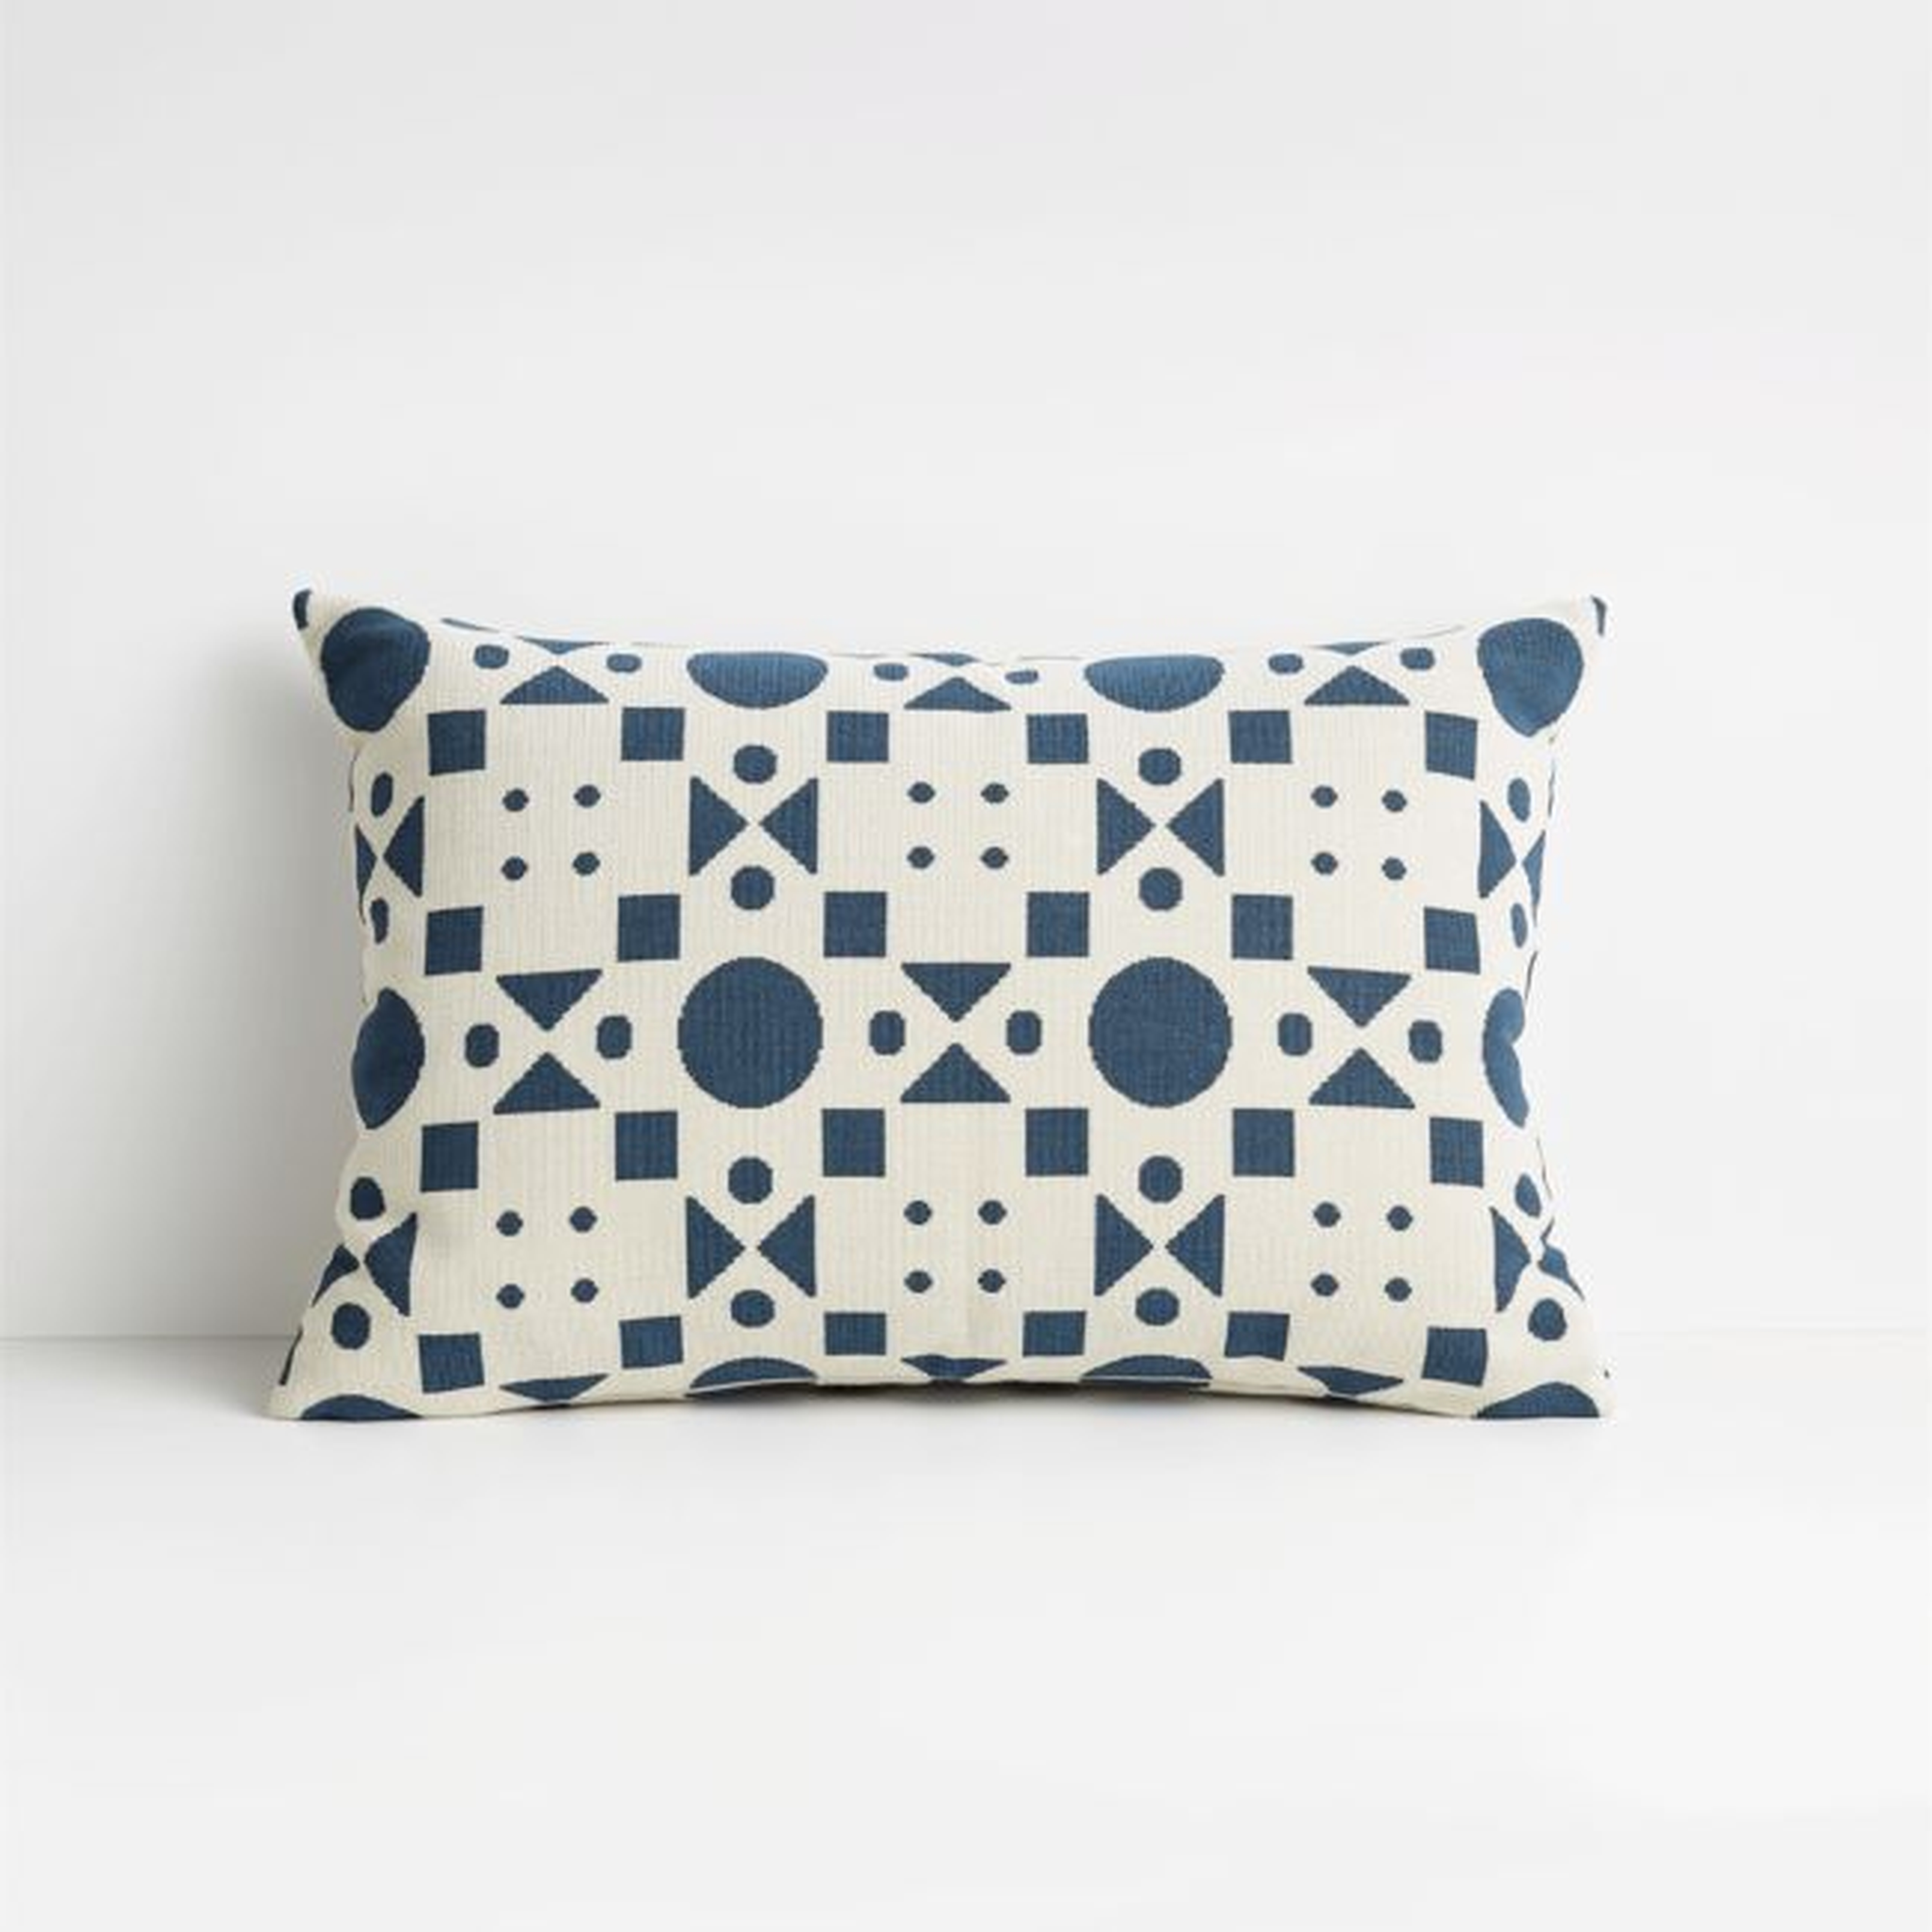 Araati 22"x15" Blue Floral Pillow Cover - Crate and Barrel